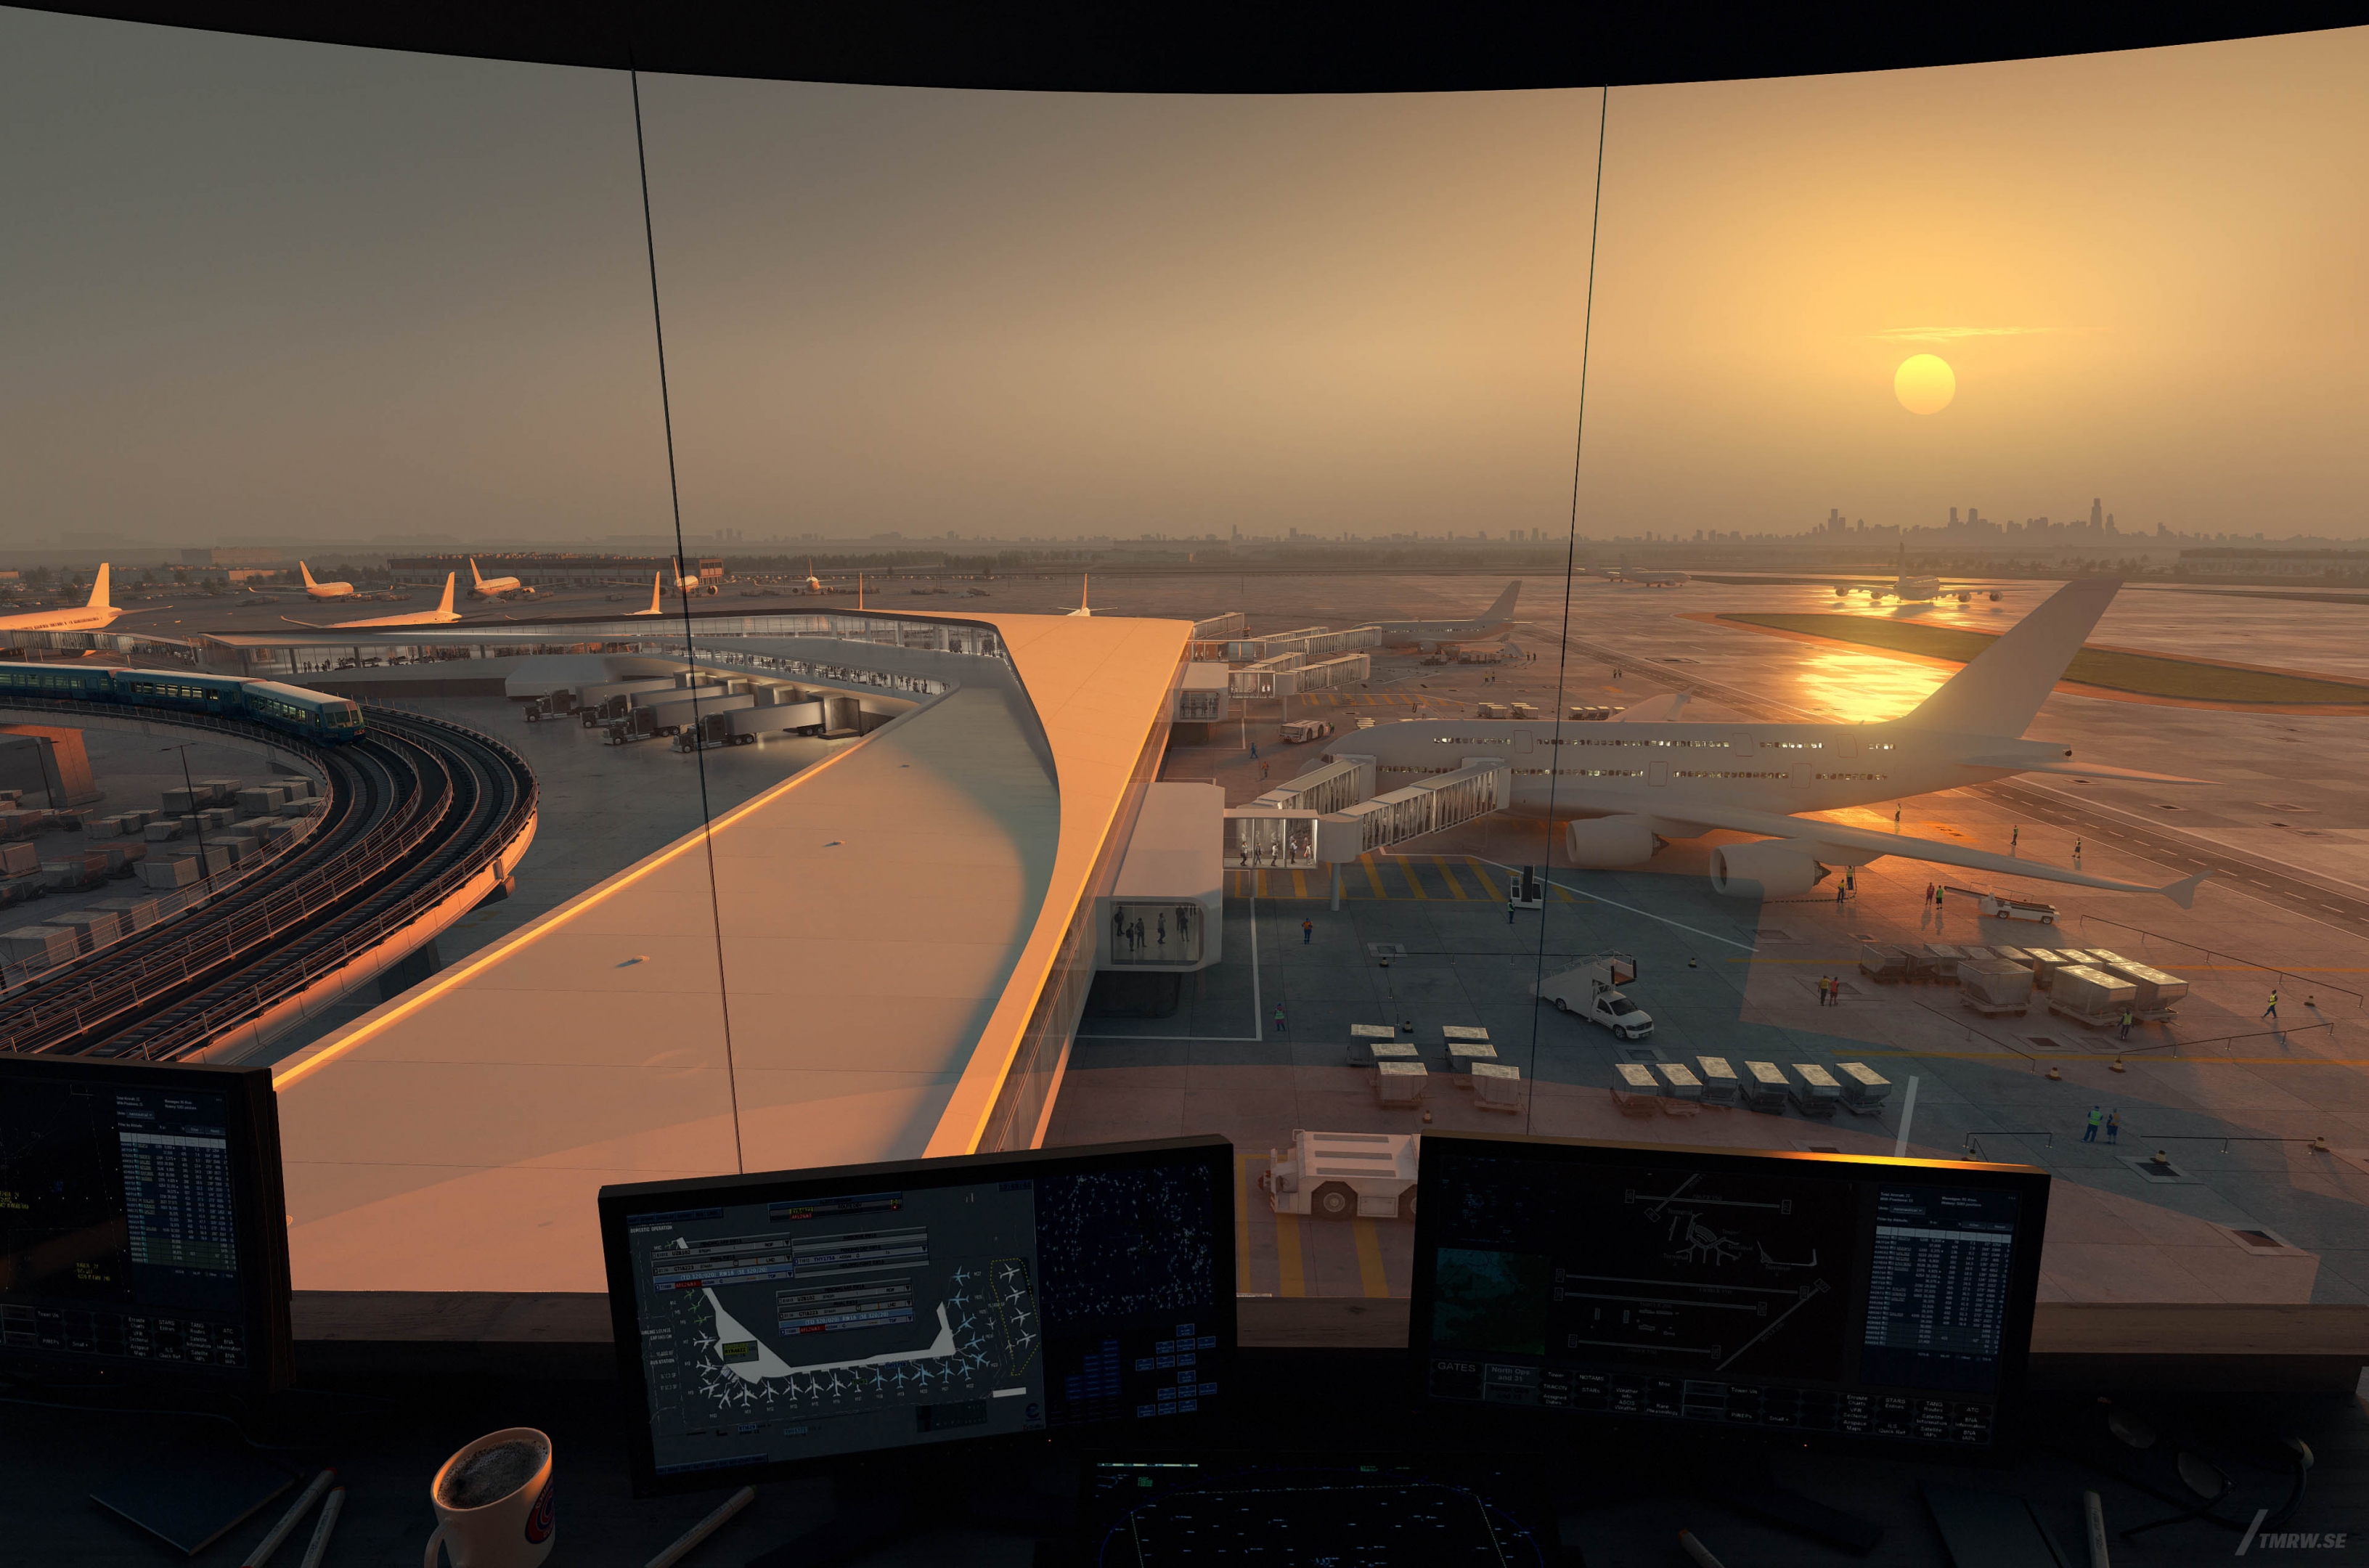 Architectural visualization of Chicago OHare for HOK a airport in goldenhour light form a window view.